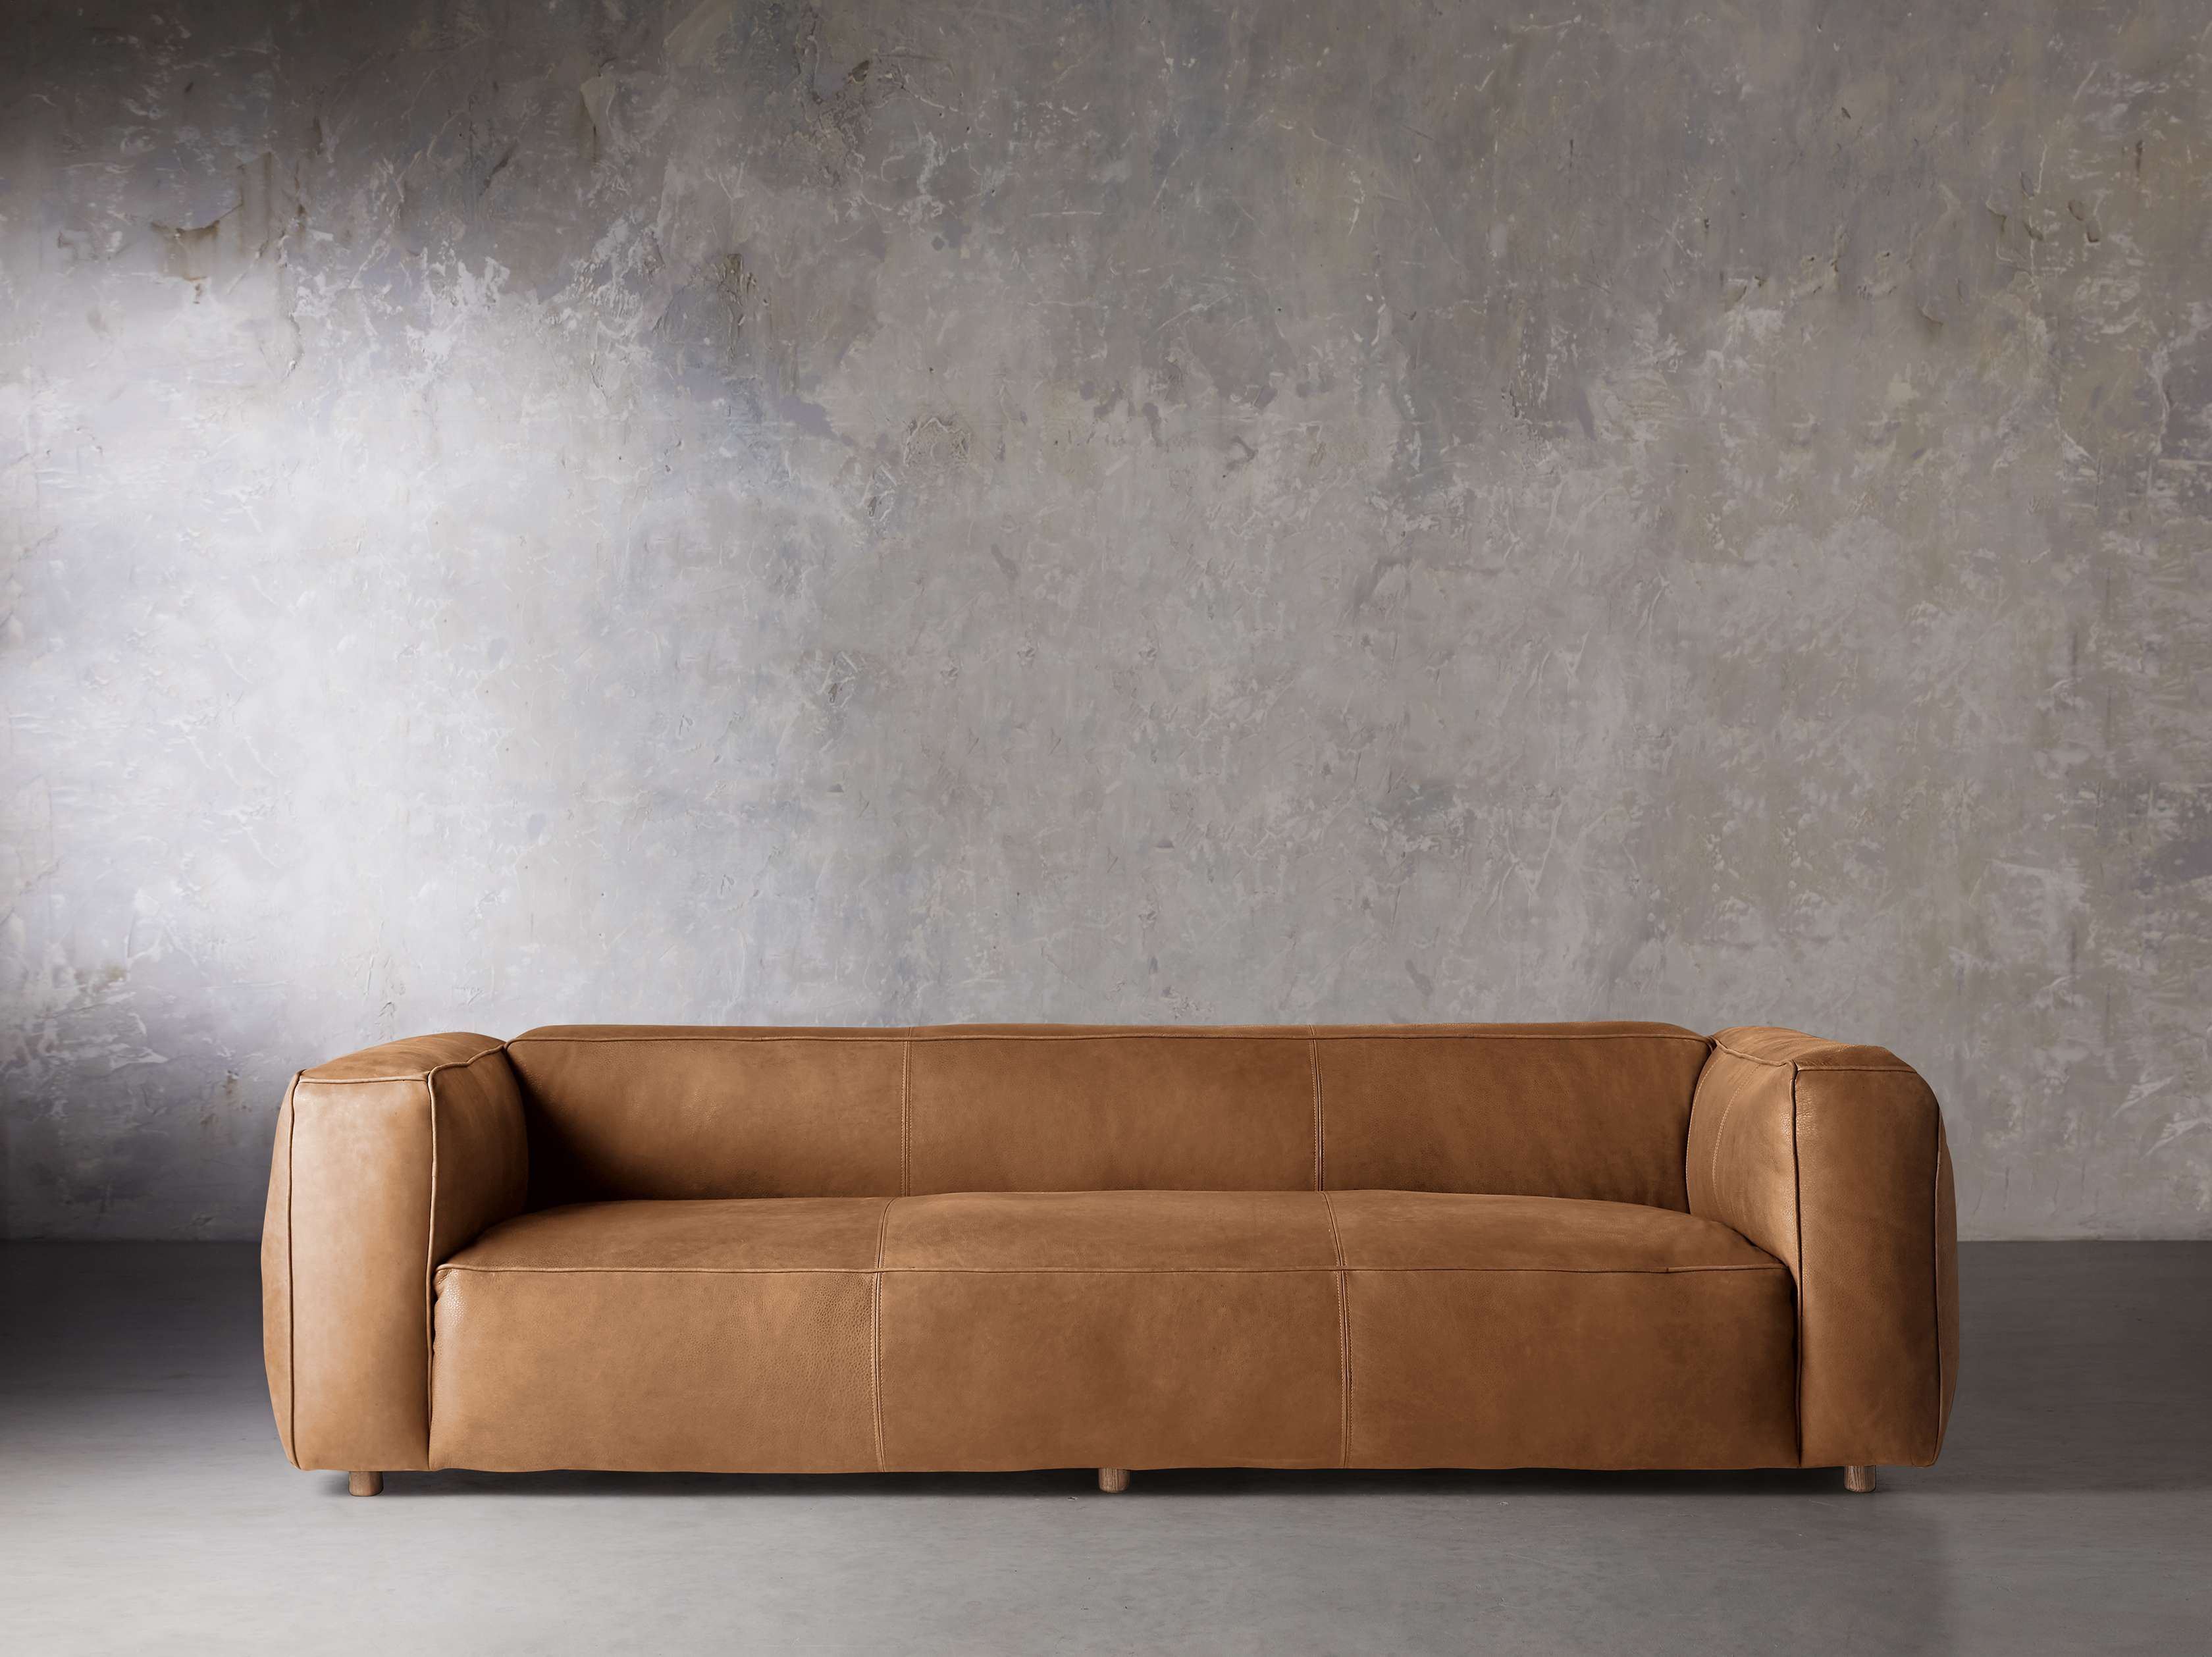 Madrone Leather Sofa Arhaus, How To Hide Tear On Leather Sofa